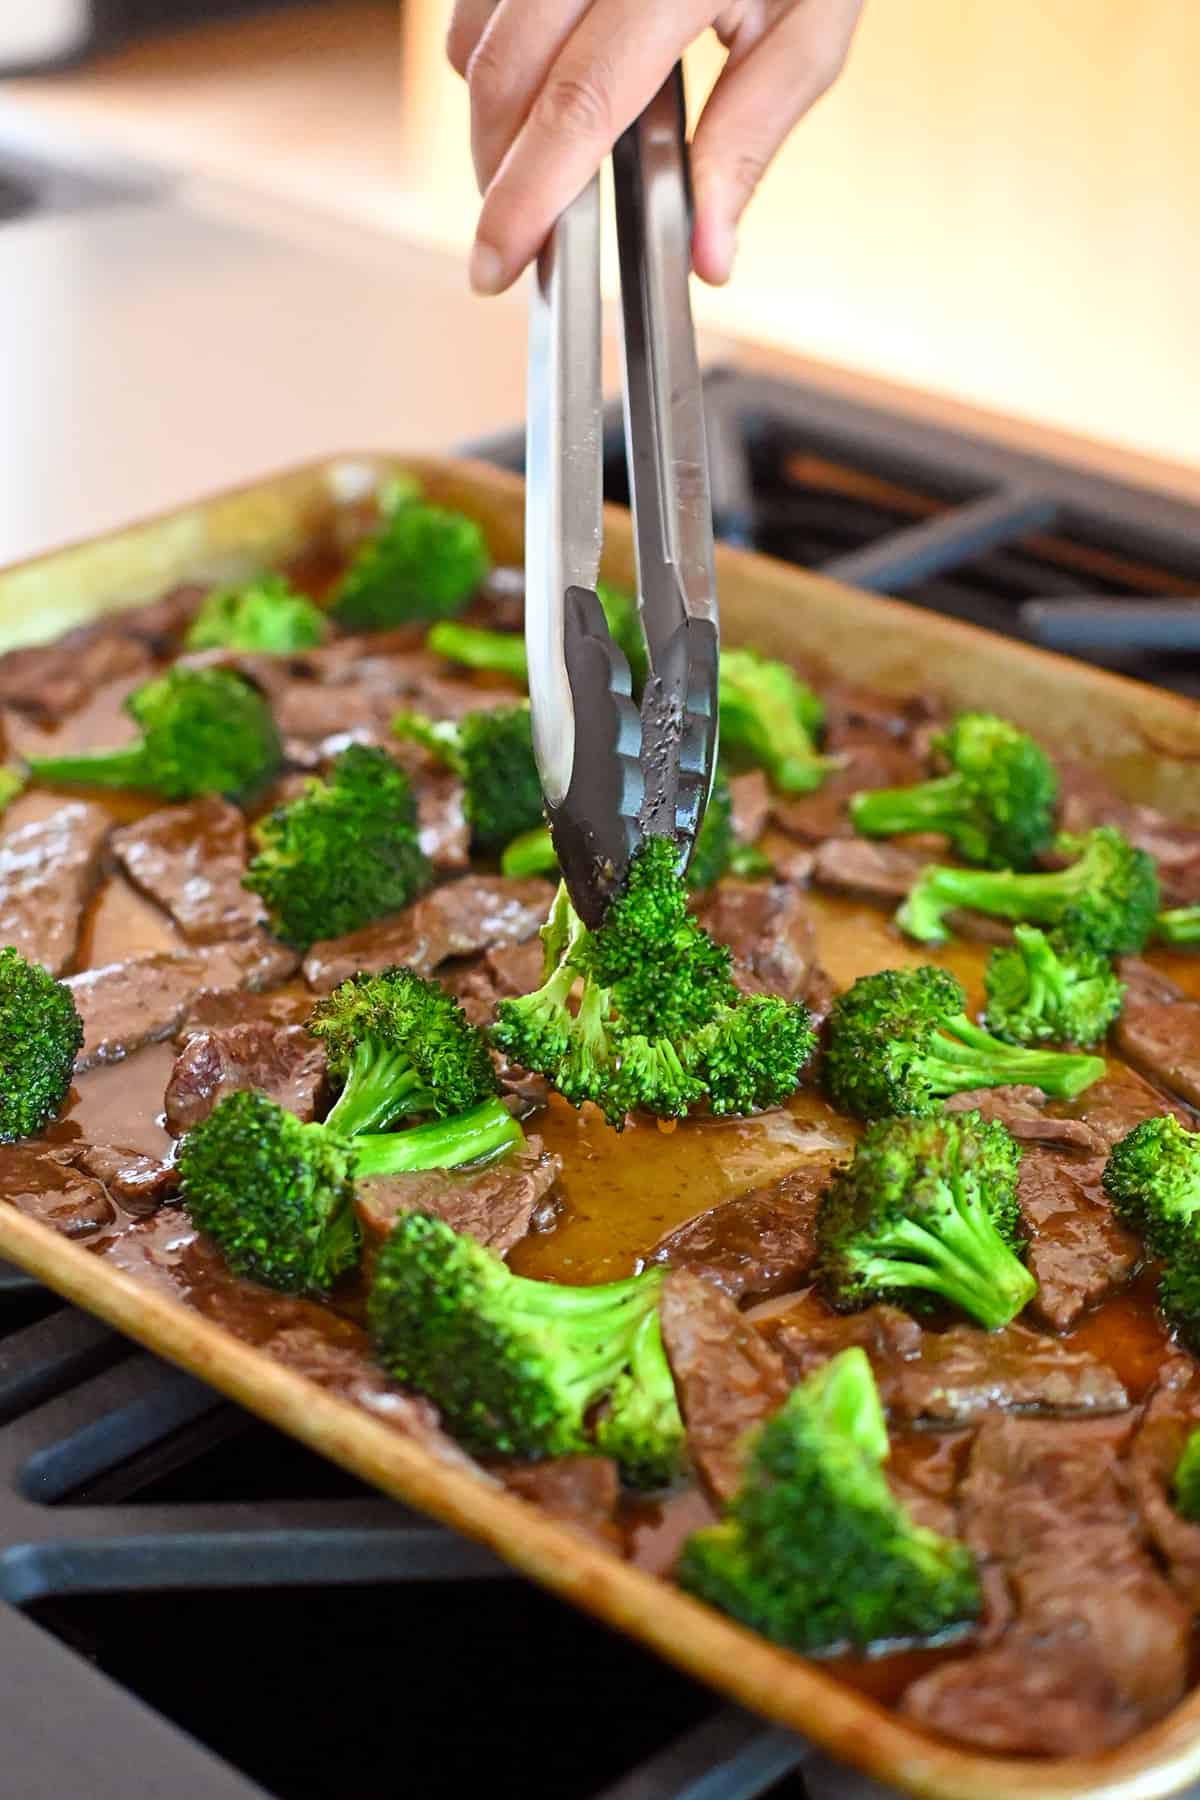 A pair of tongs is rearranging the beef and broccoli on the sheet pan before putting it under the broiler.